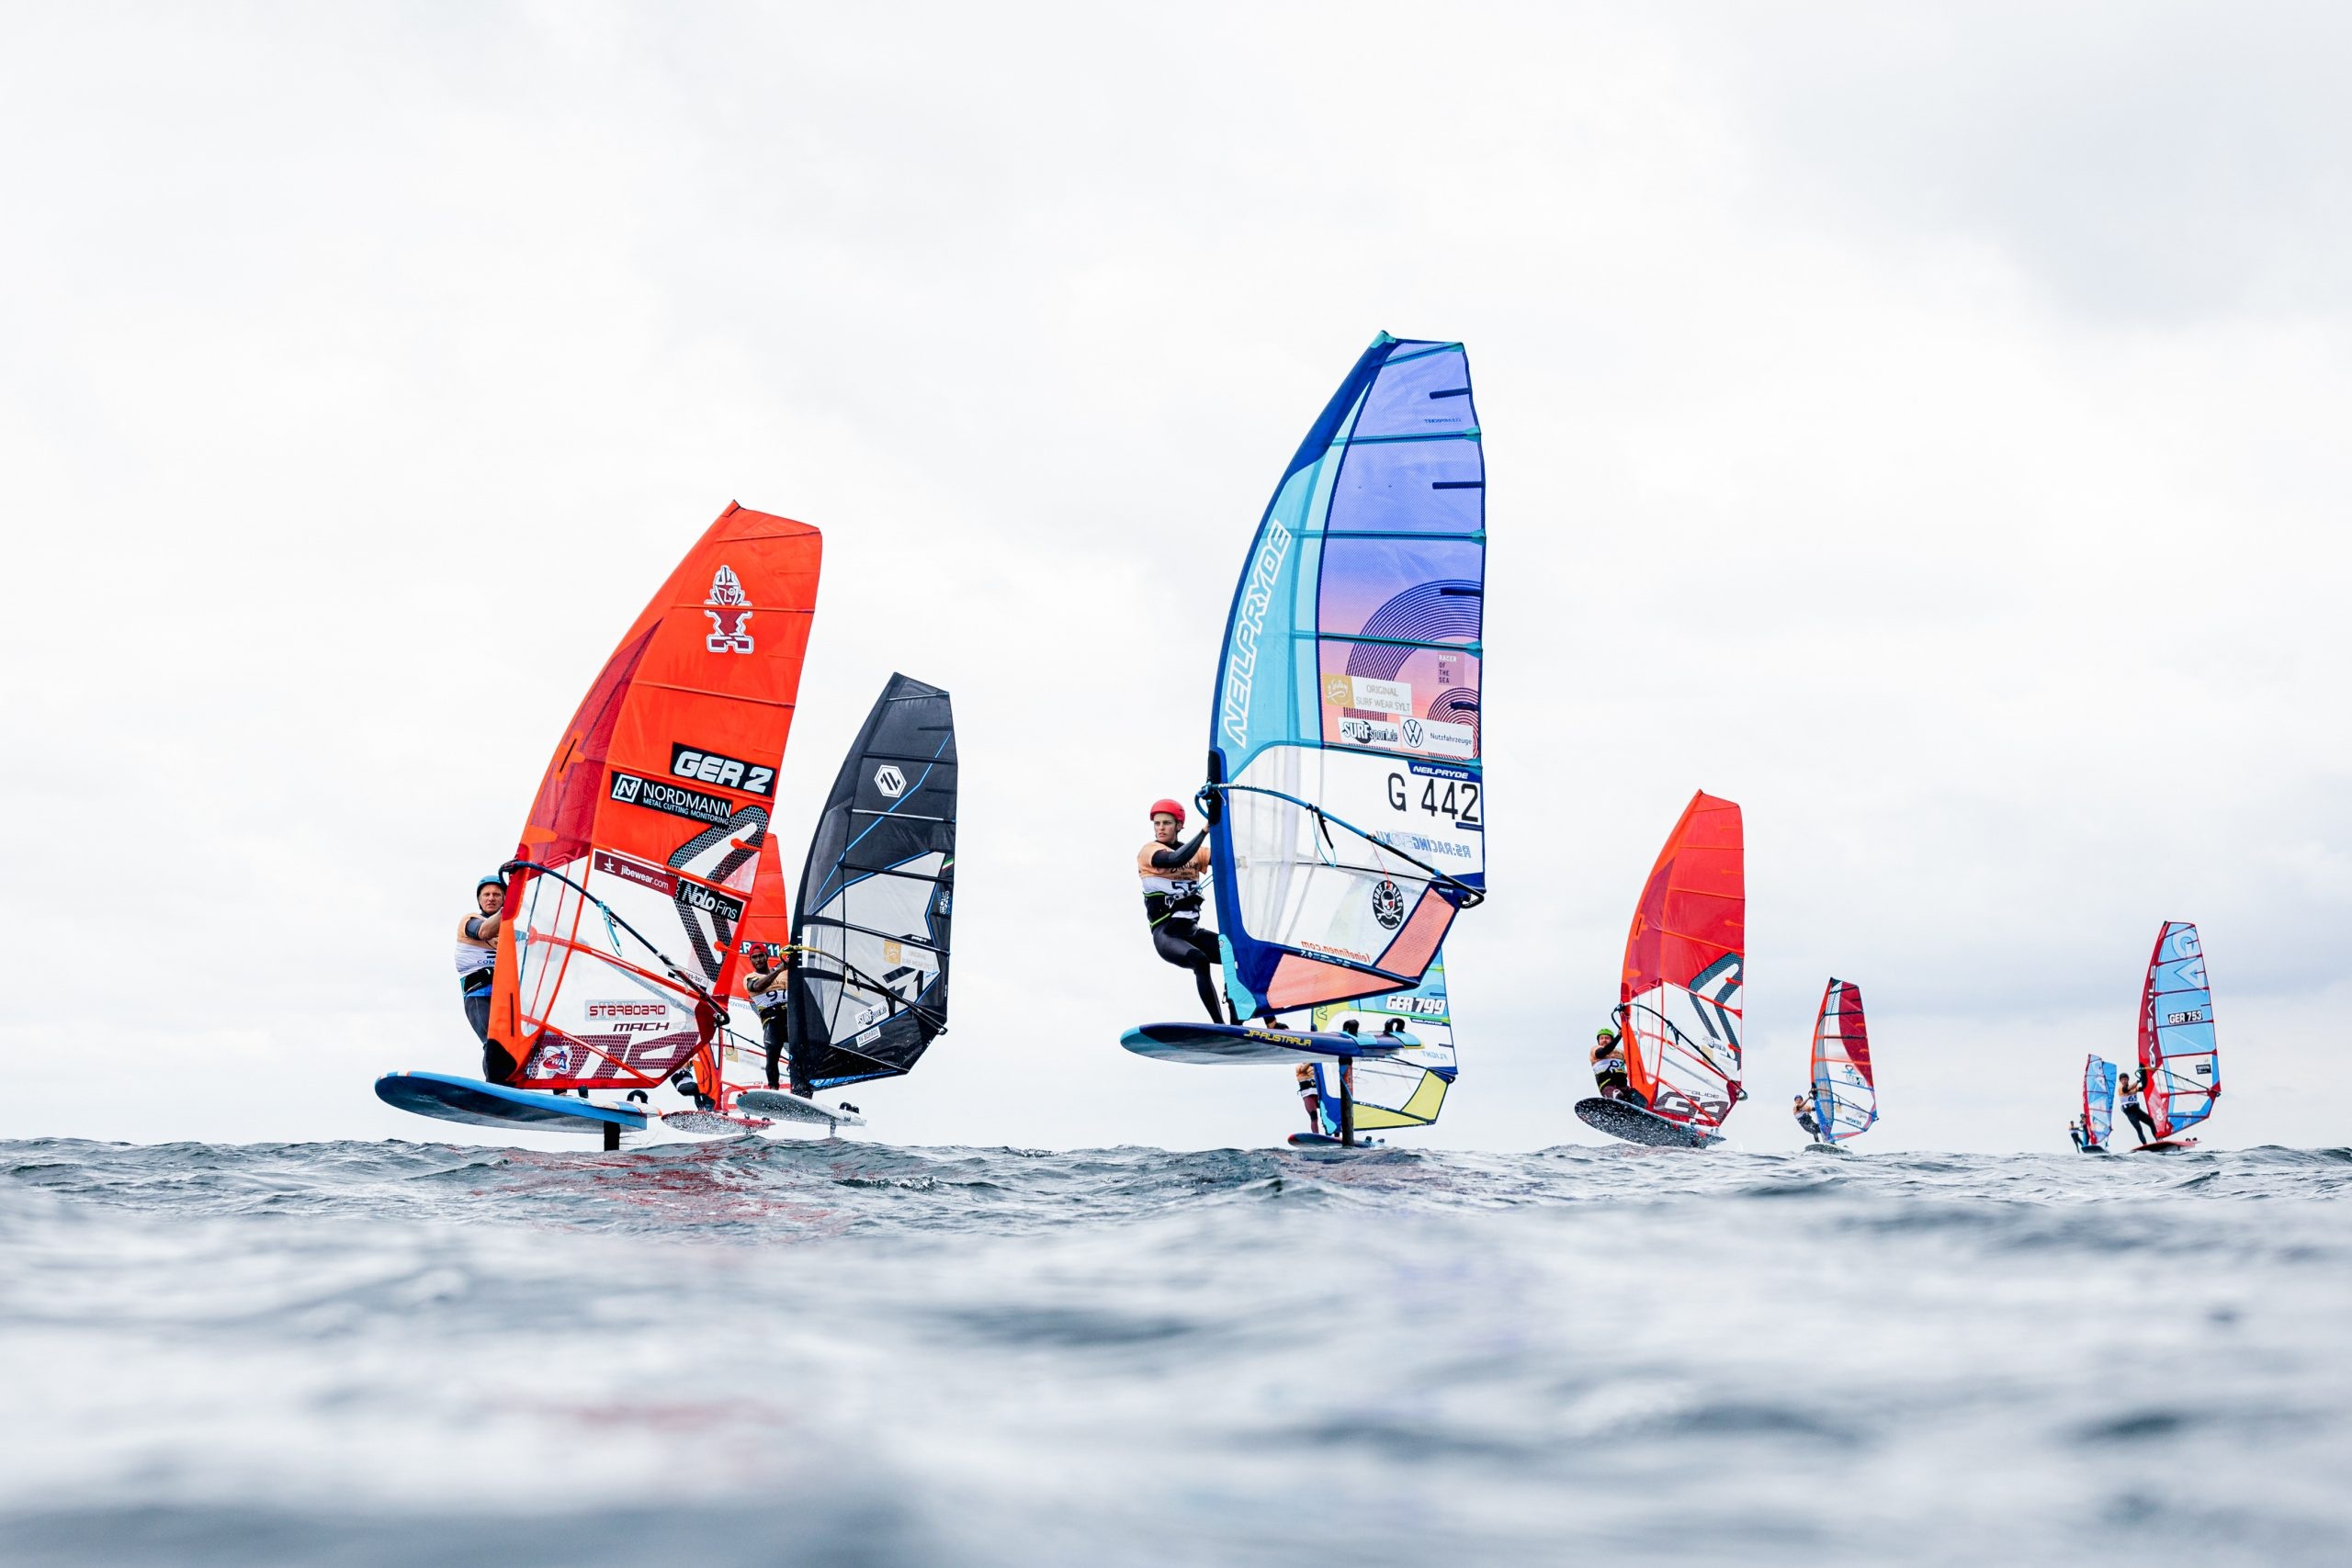 Windsurfing: Windsurf Regatta Competition, Open Windfoil Youth, Water Sports Events 2022. 2560x1710 HD Wallpaper.